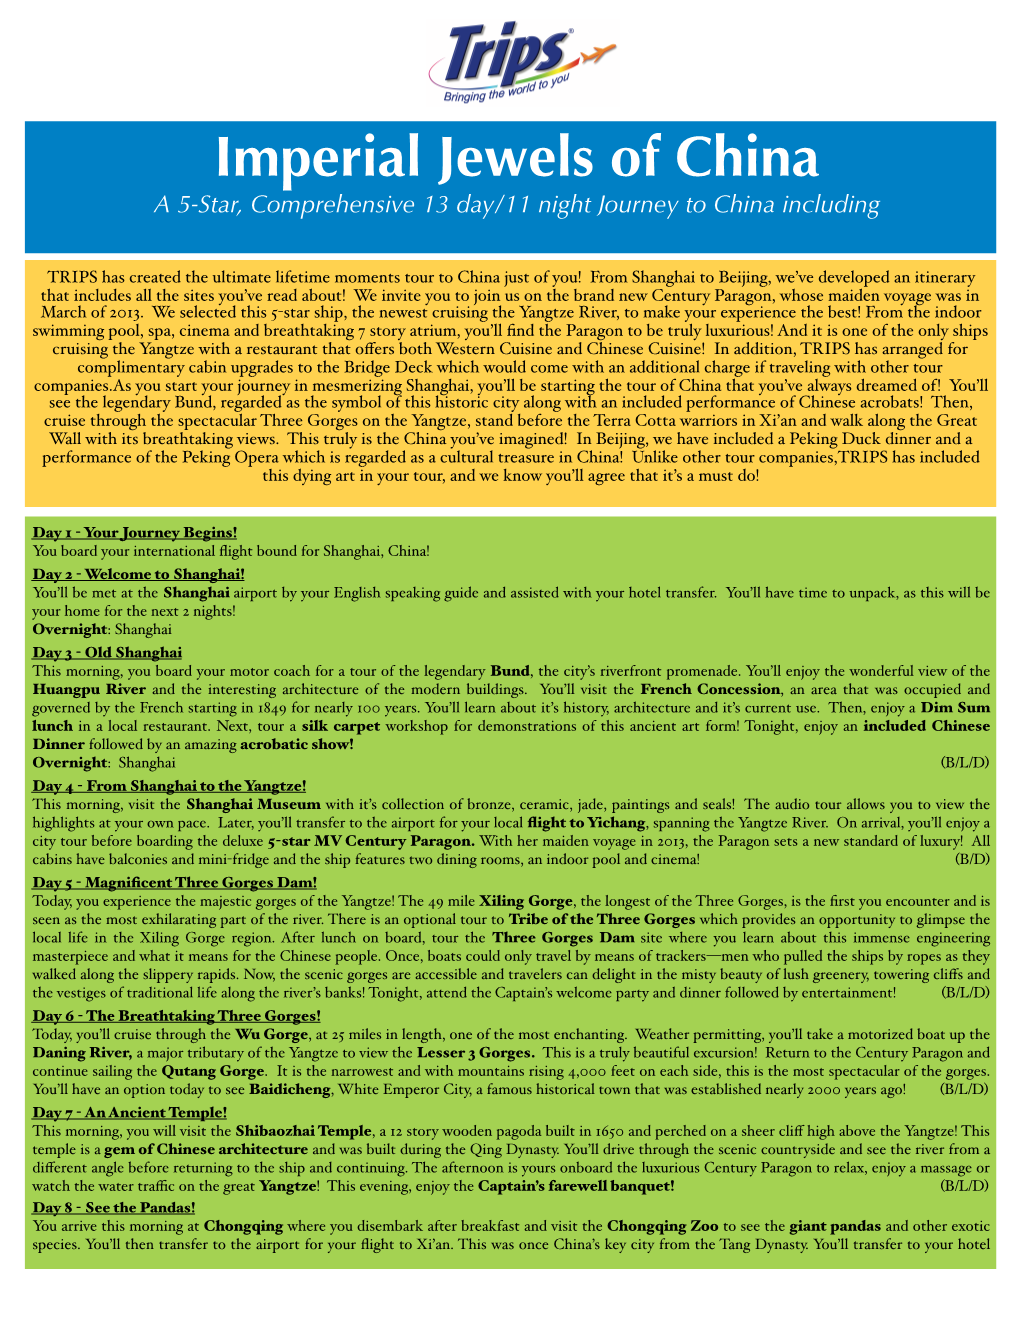 Imperial Jewels of China a 5-Star, Comprehensive 13 Day/11 Night Journey to China Including